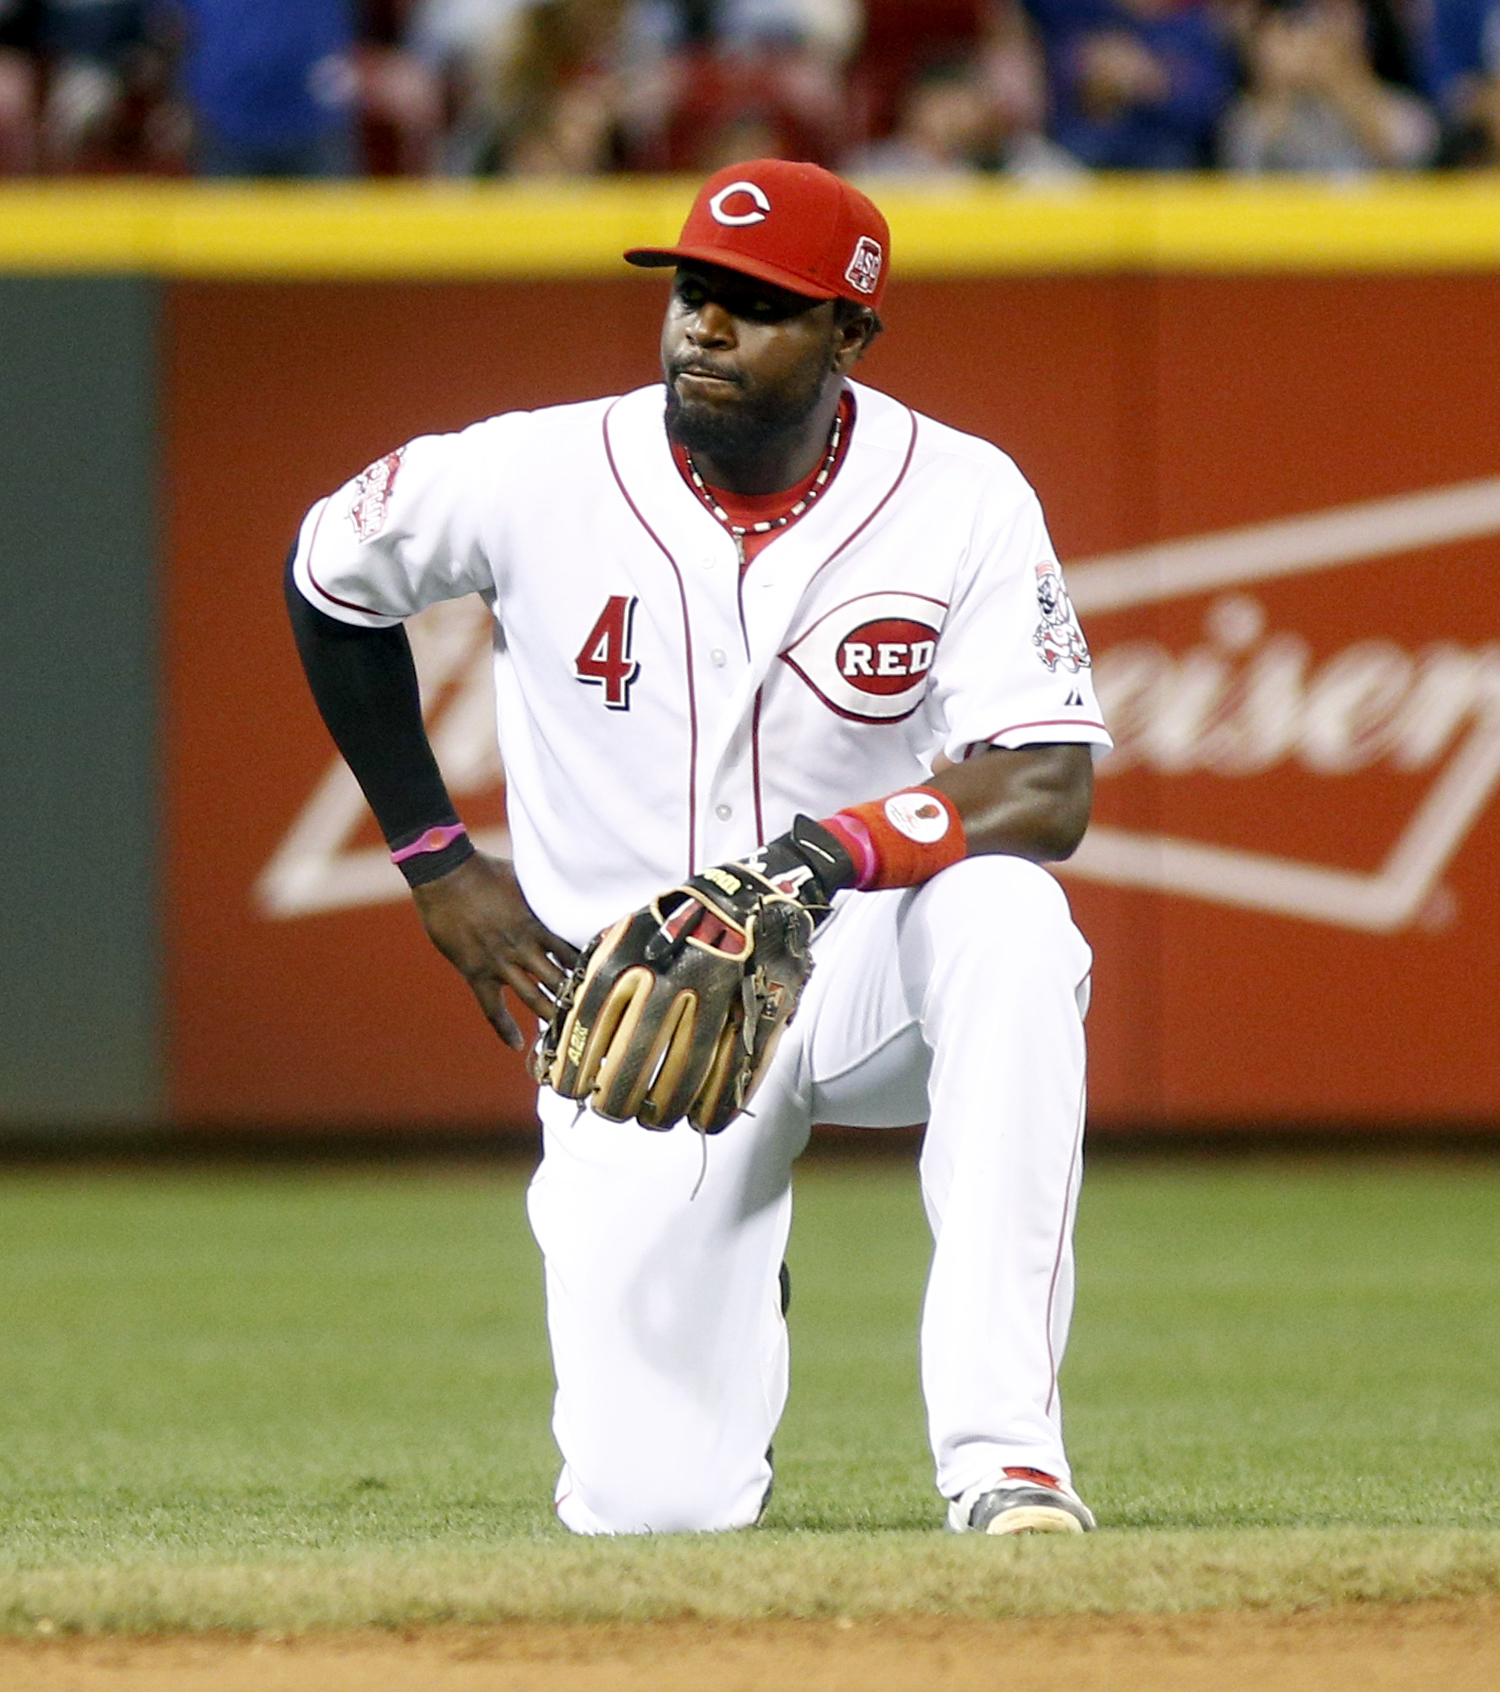 On Tuesday night, Ken Rosenthal linked the Nats to former Expos farmhand Brandon Phillips. I have one question. Why on earth would they want him at this point?